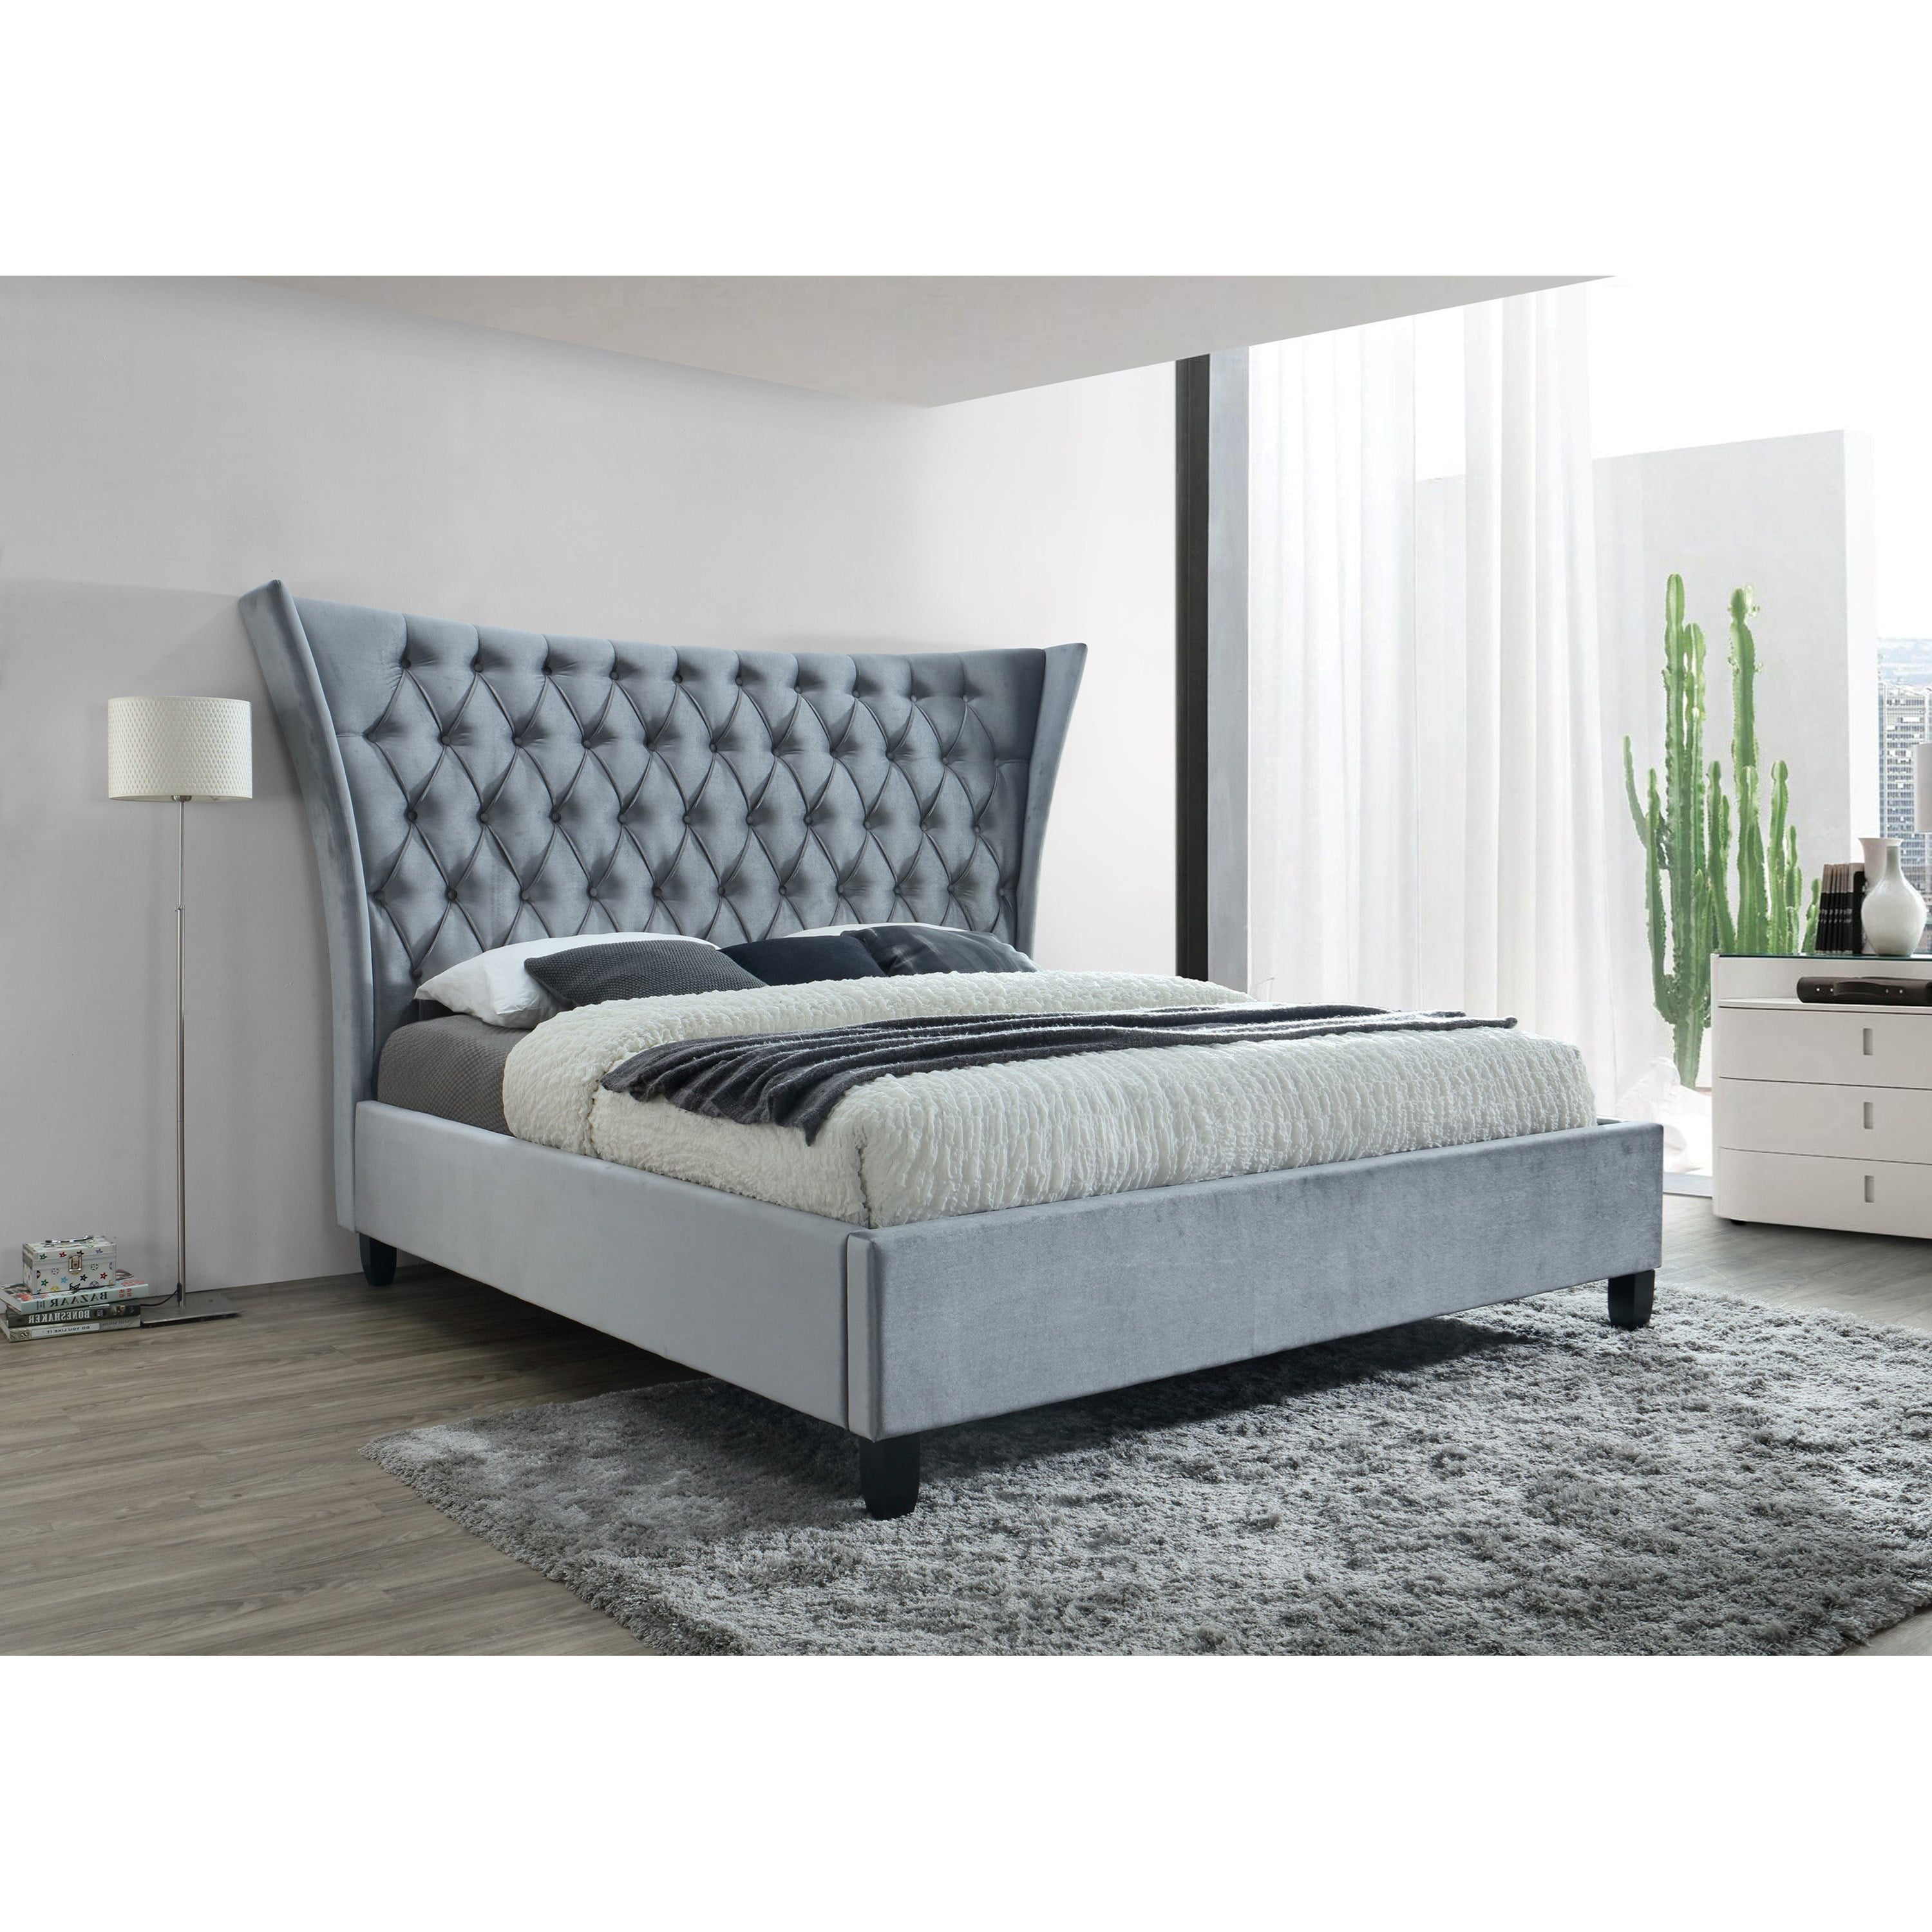 Tufted Headboard King Size Upholstered Bedroom Furniture Modern Gray Fabric New